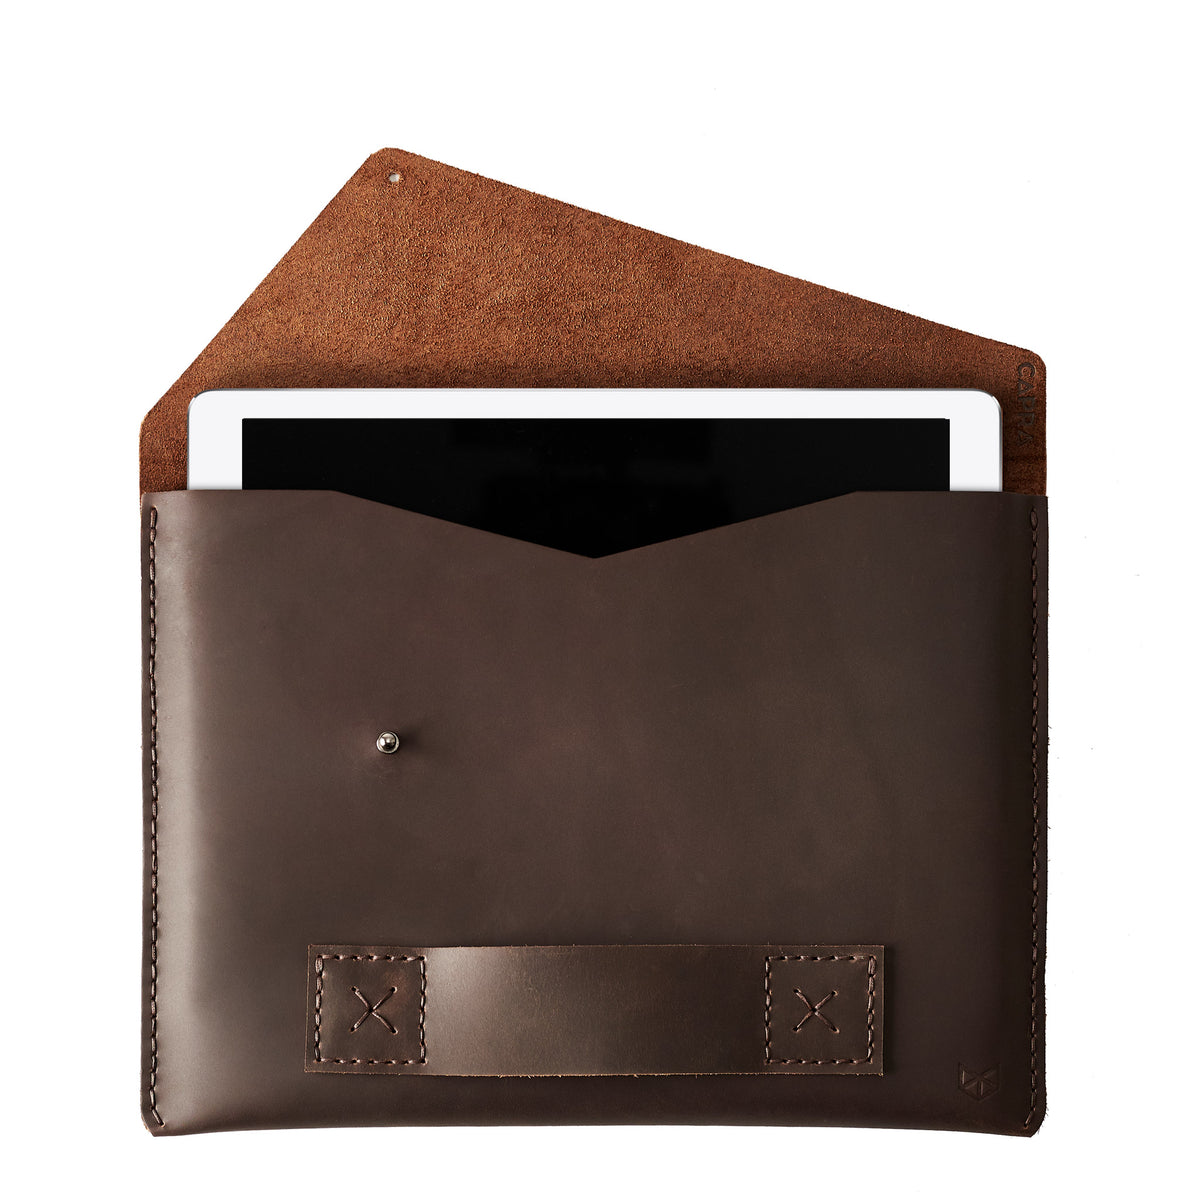 Cover .Dark brown iPad pro 12.9 inch leather sleeve. Mens leather iPad case for mens gifts